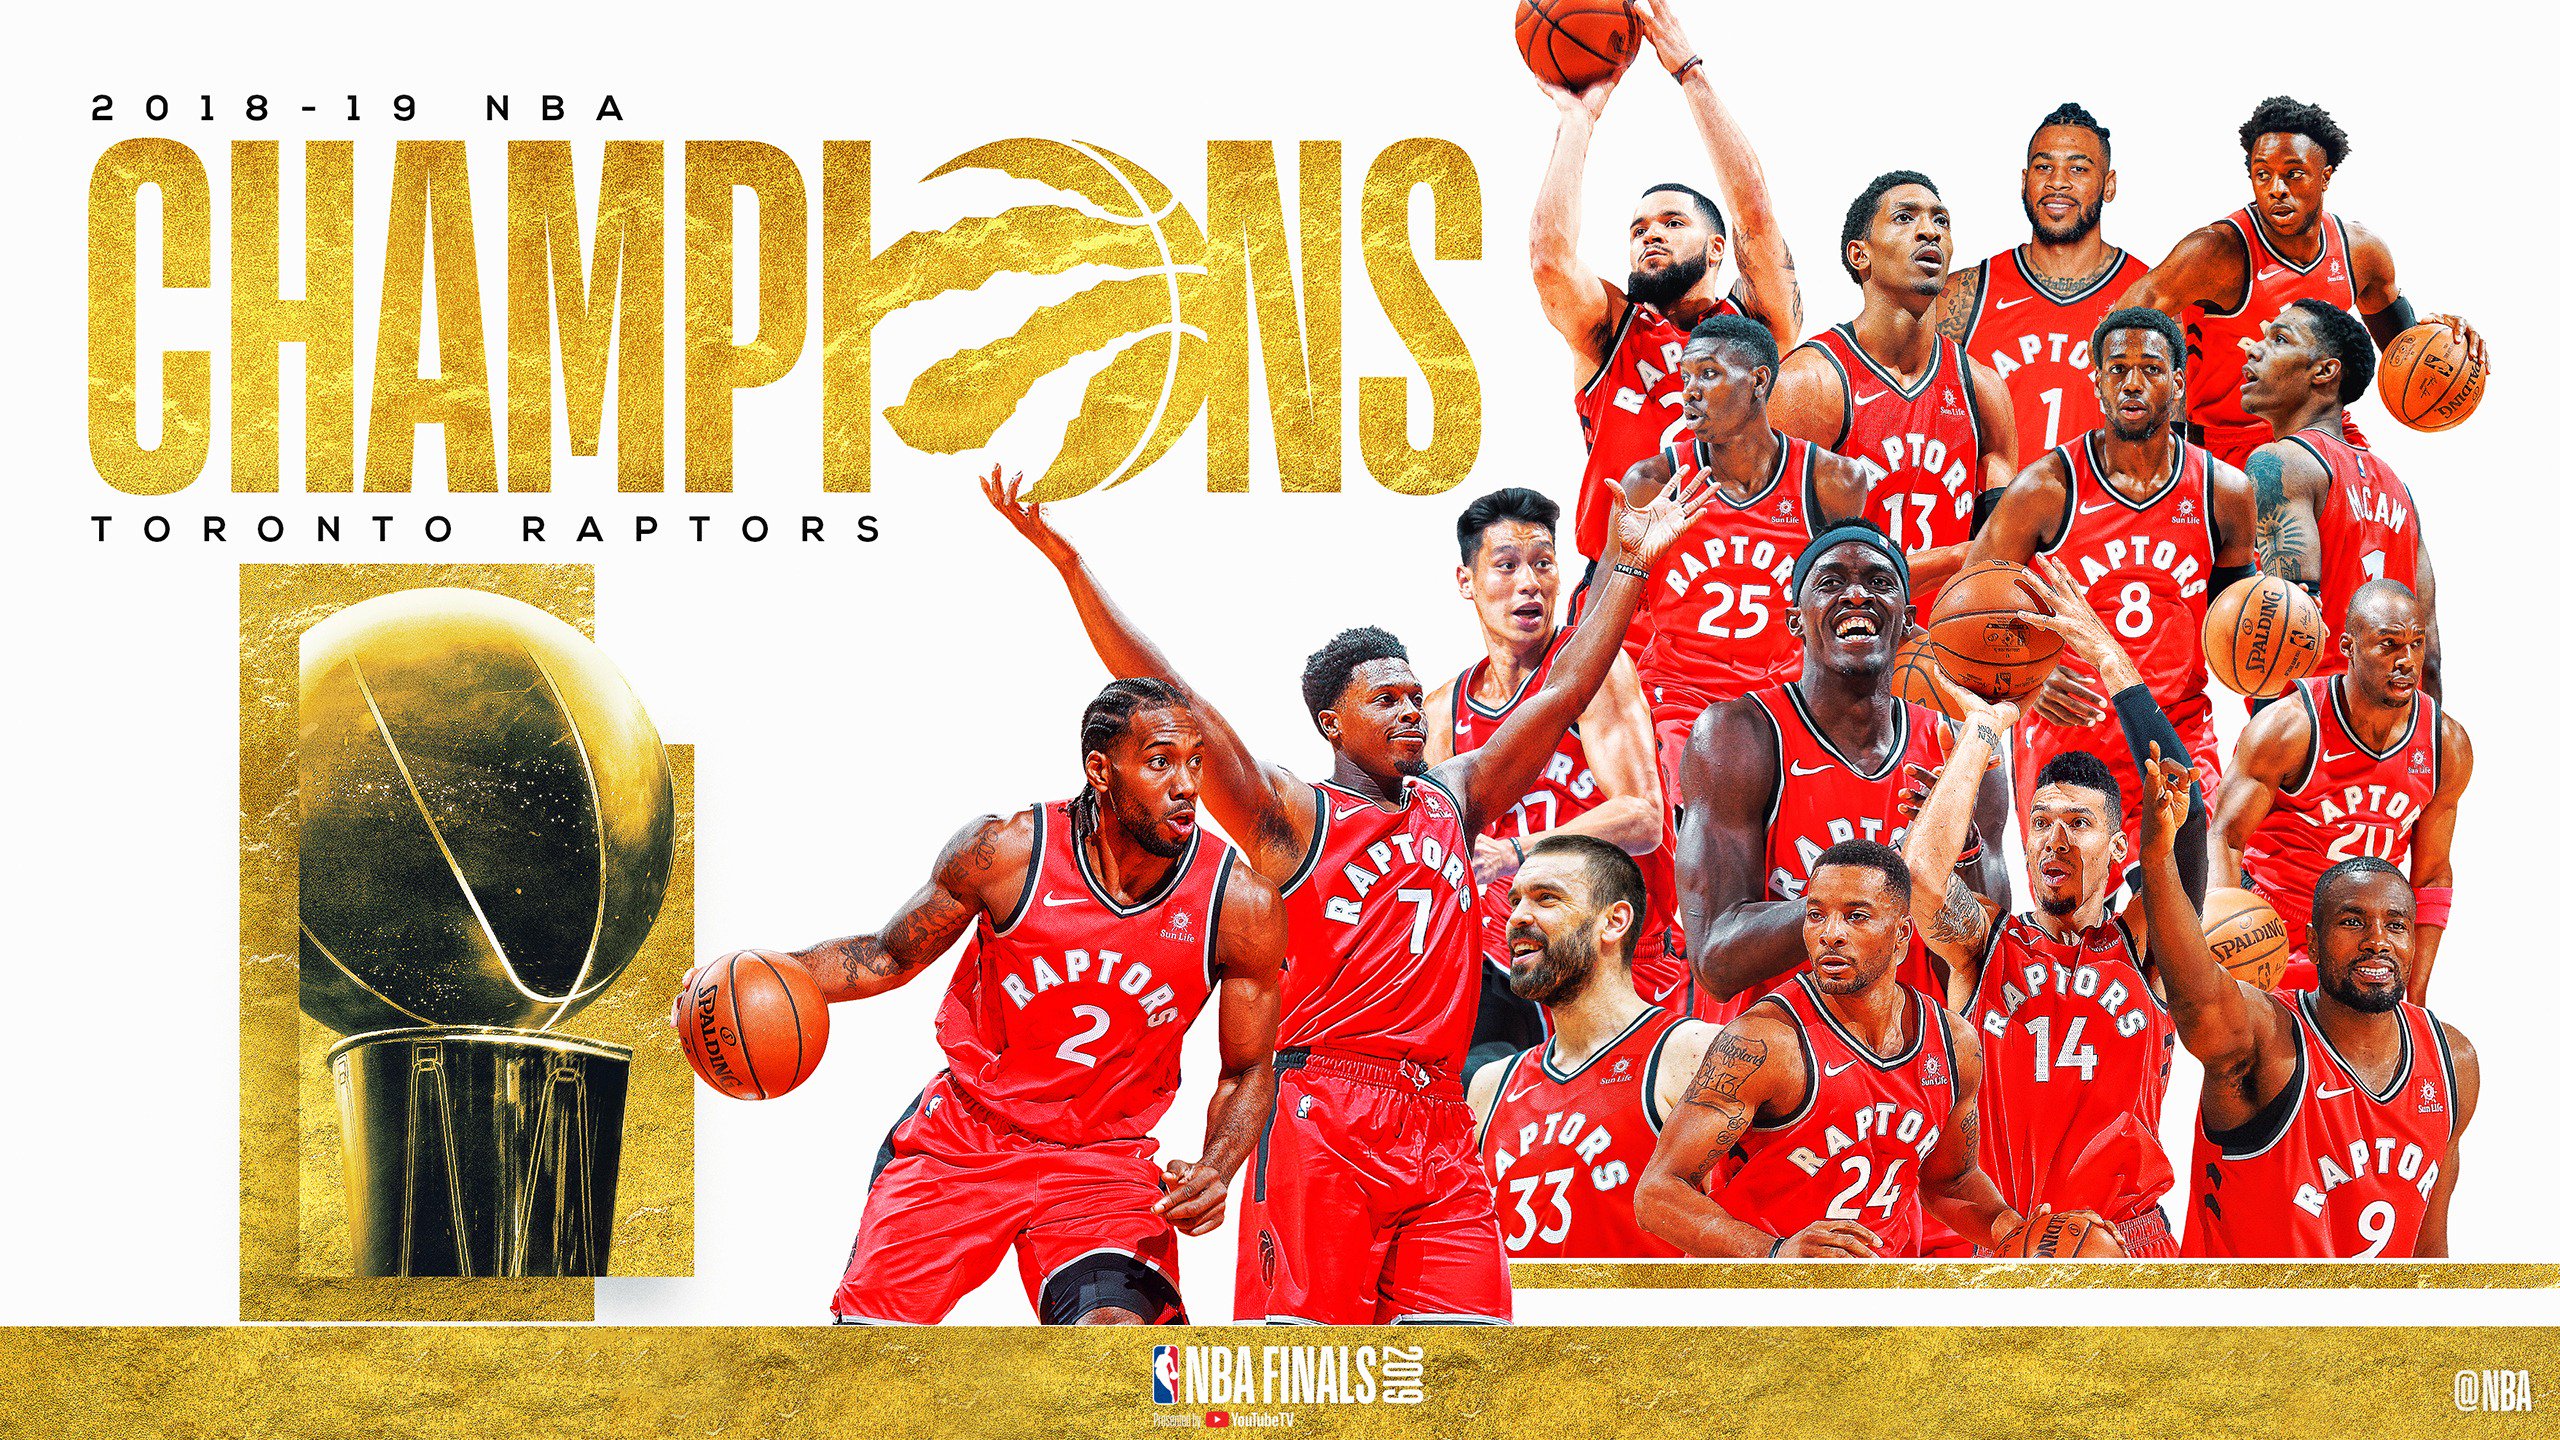 NBA on Twitter: "The @Raptors are the 2019 NBA Champions! #WeTheNorth https://t.co/nooya0x6Db" /